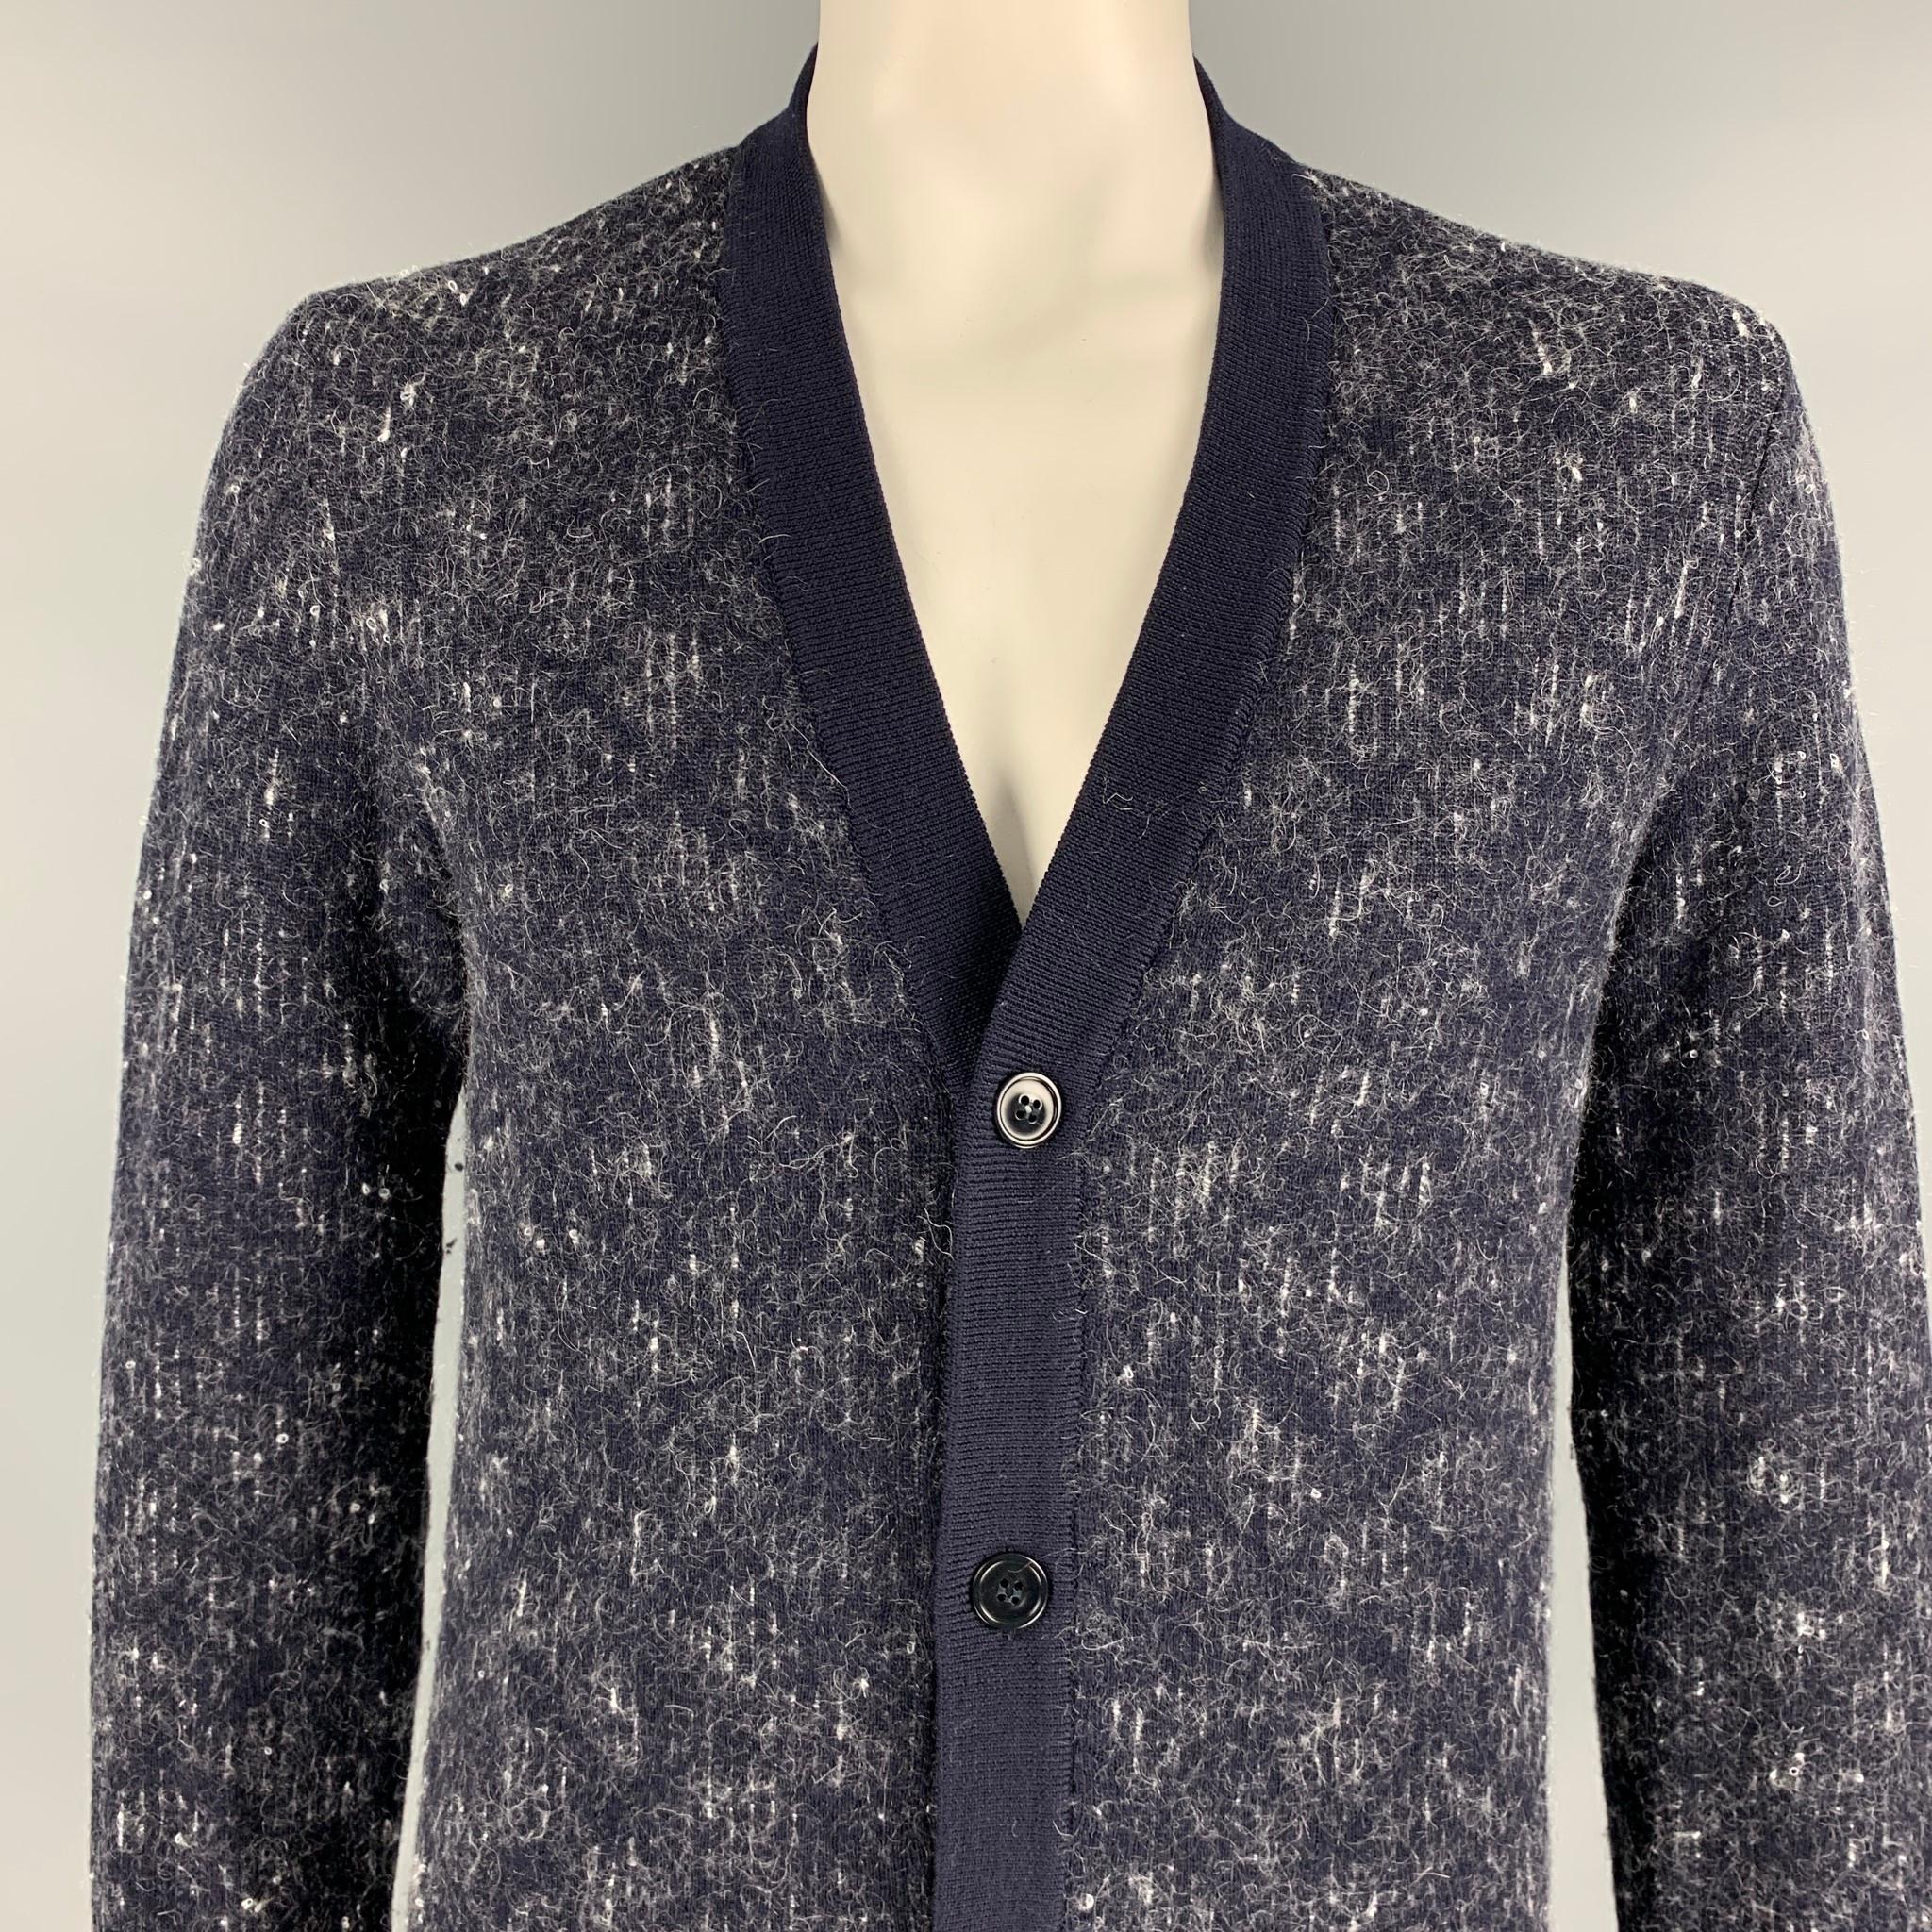 MAISON MARTIN MARGIELA cardigan comes in a navy & white stripe wool blend featuring a ribbed hem and a buttoned closure. 

Very Good Pre-Owned Condition.
Marked: XL

Measurements:

Shoulder: 17.5 in.
Chest: 42 in.
Sleeve: 31.5 in.
Length: 29.5 in. 